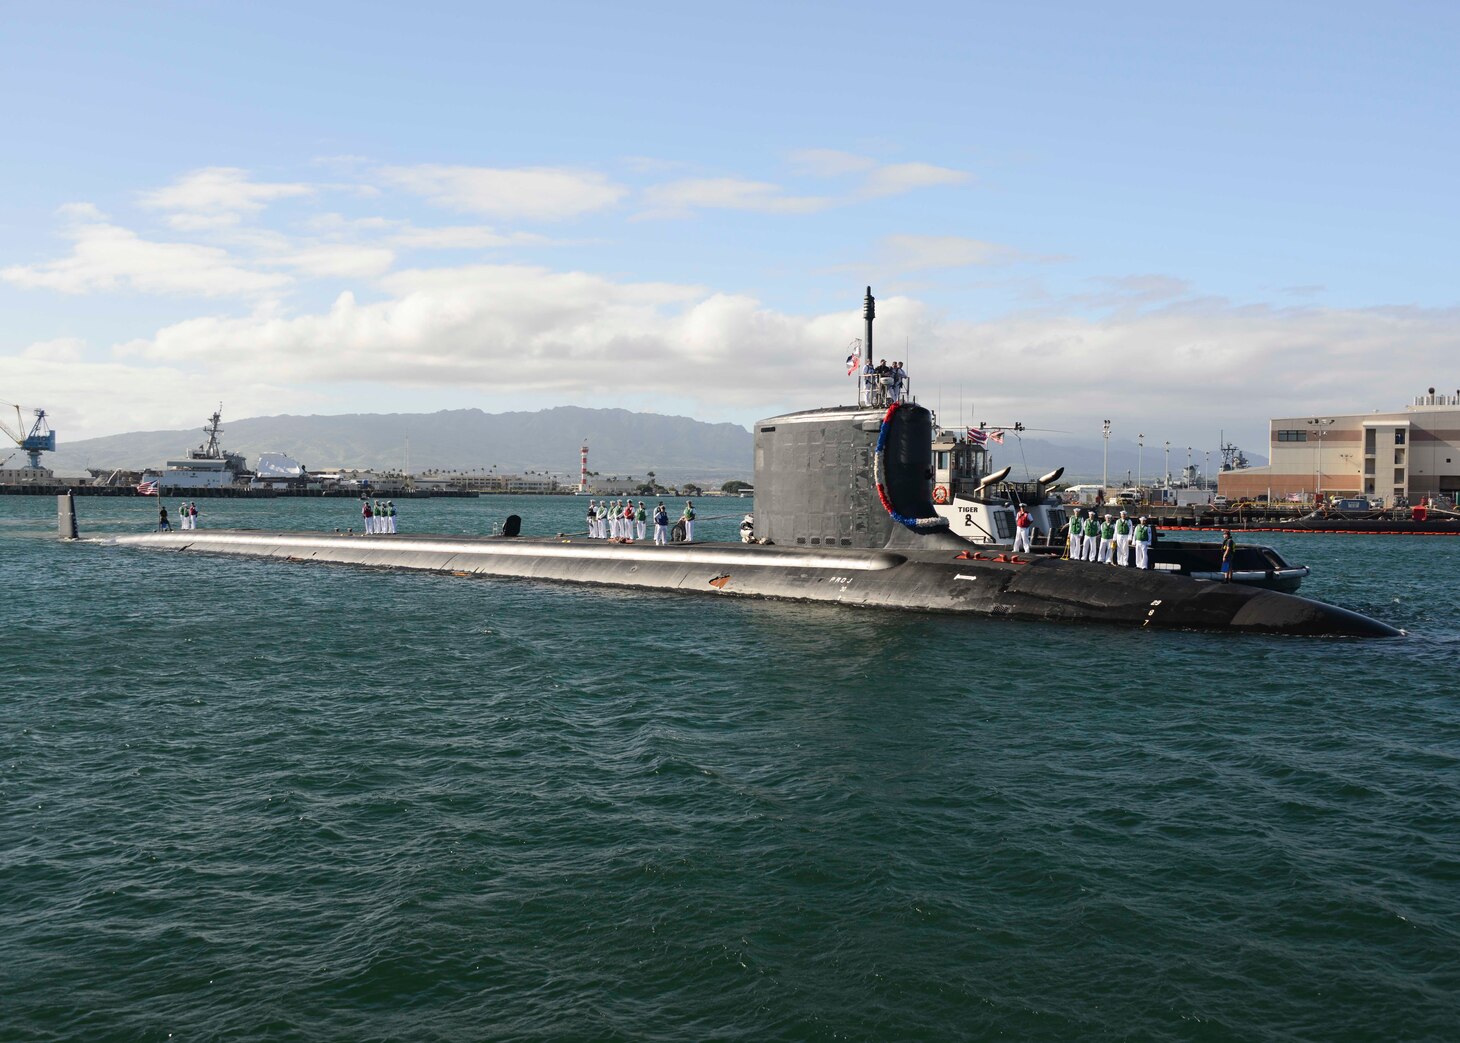 PEARL HARBOR (Nov. 25, 2014) The Virginia-class attack submarine USS Mississippi (SSN 782) arrives at Joint Base Pearl Harbor-Hickam for a change of homeport from Commander, Submarine Squadron (SUBRON) 4 in Groton, Conn., to SUBRON-1. Mississippi is the 4th Virginia-class submarine to be home ported in Pearl Harbor, and one of 18 attack submarines permanently homeported at the historic base. (U.S. Navy photo by Mass Communication Specialist 1st Class Steven Khor/Released)